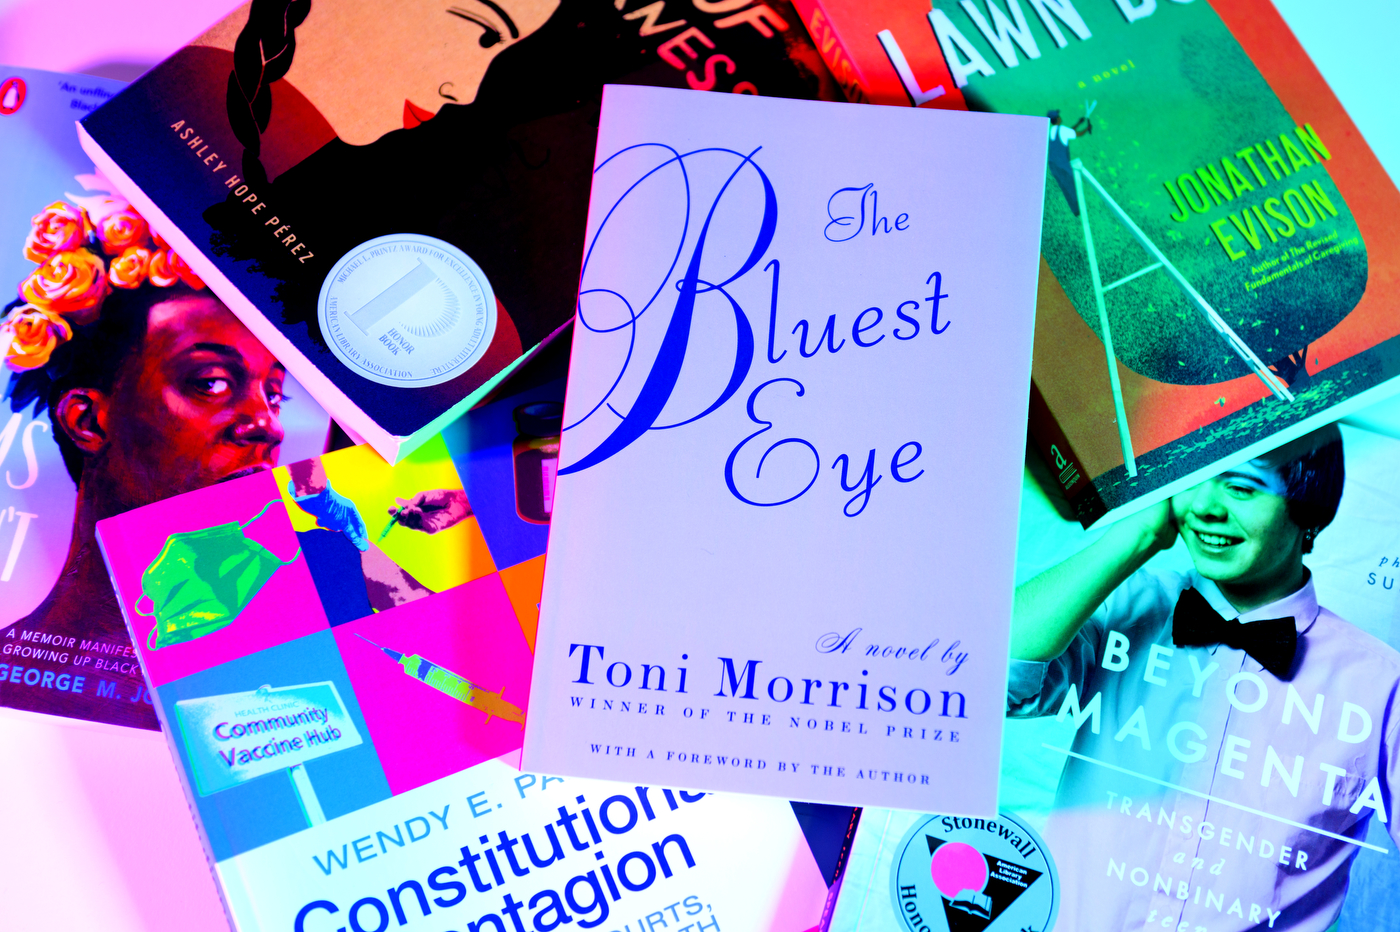 stack of books with a book called The Bluest Eye on top